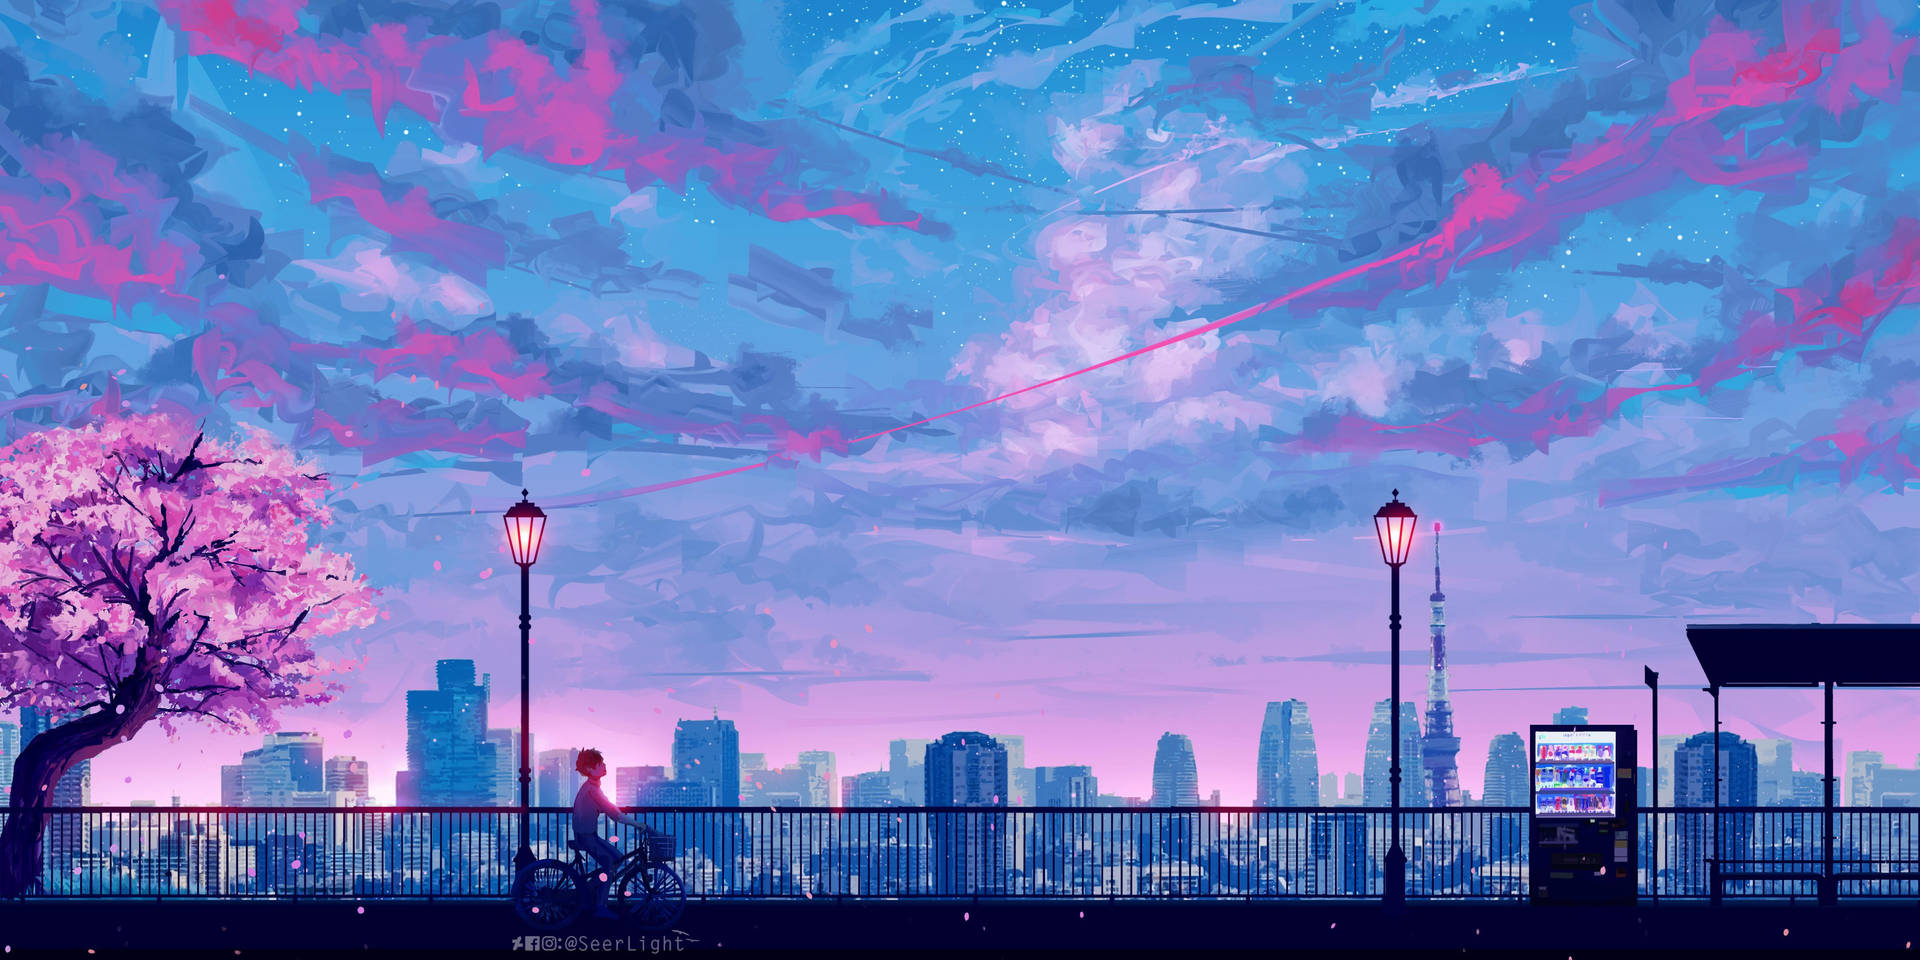 Aesthetic City With Blue Pink Sky